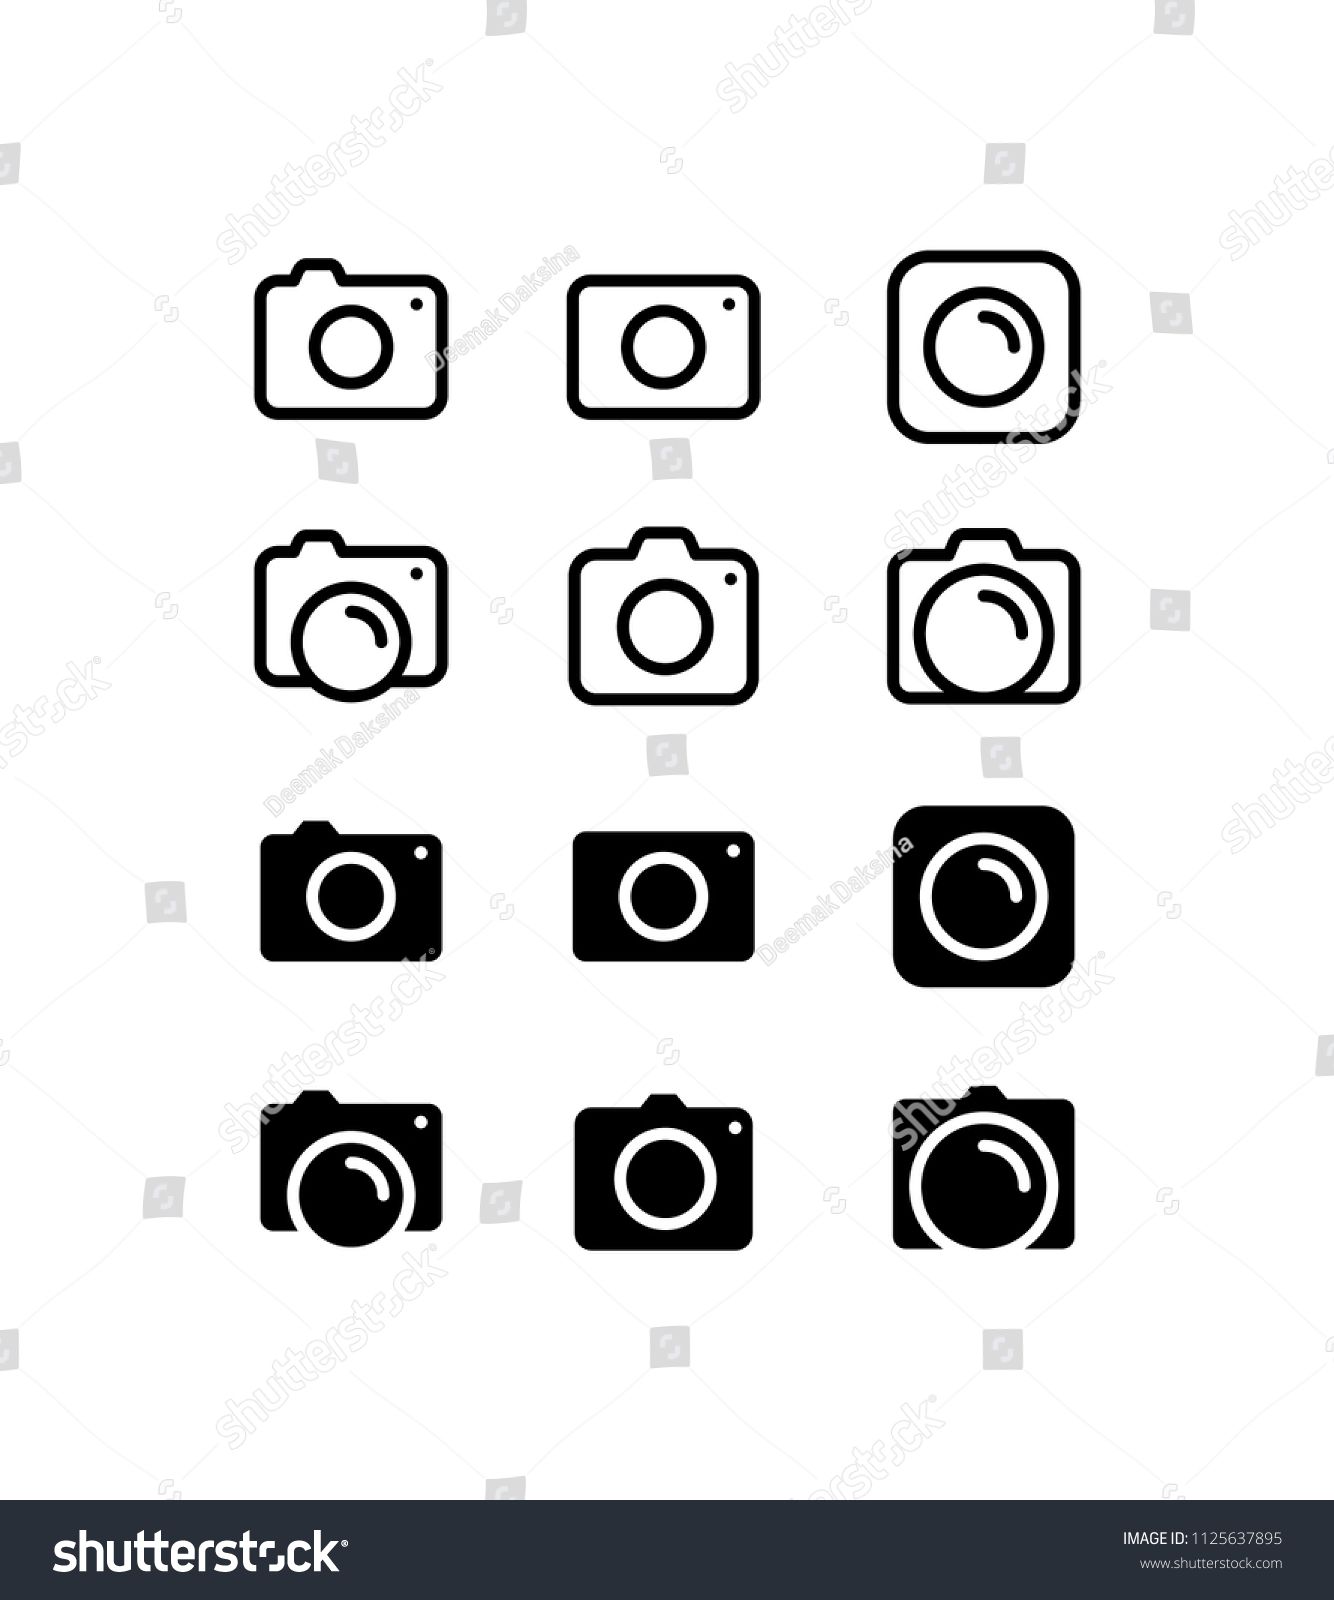 Text,Font,Line,Line art,Number,Circle,Symbol,Black-and-white,Illustration,Icon